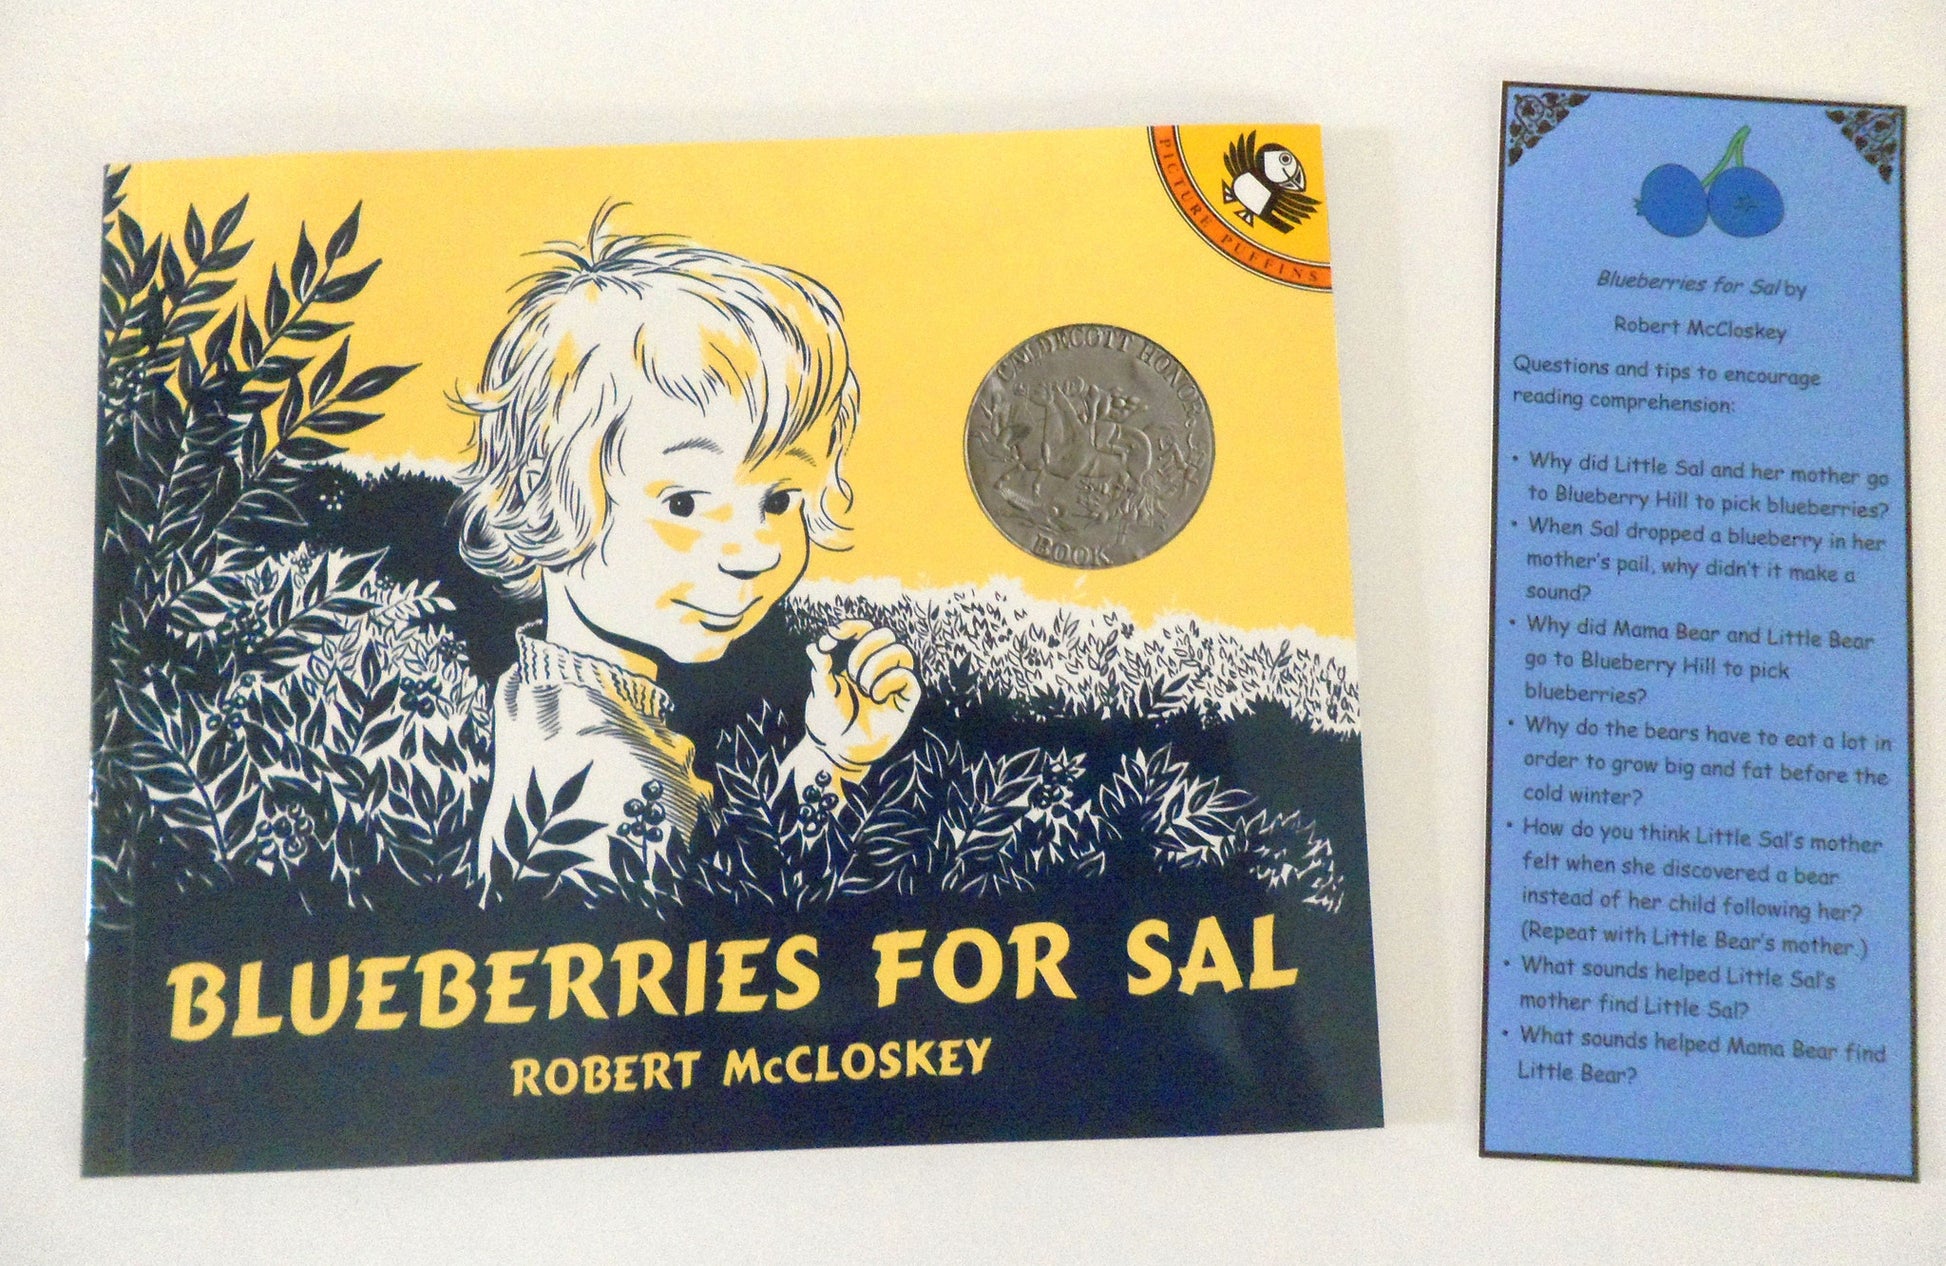 Blueberries For Sal by Robert McCloskey - Ivy Kids subscription box activities.